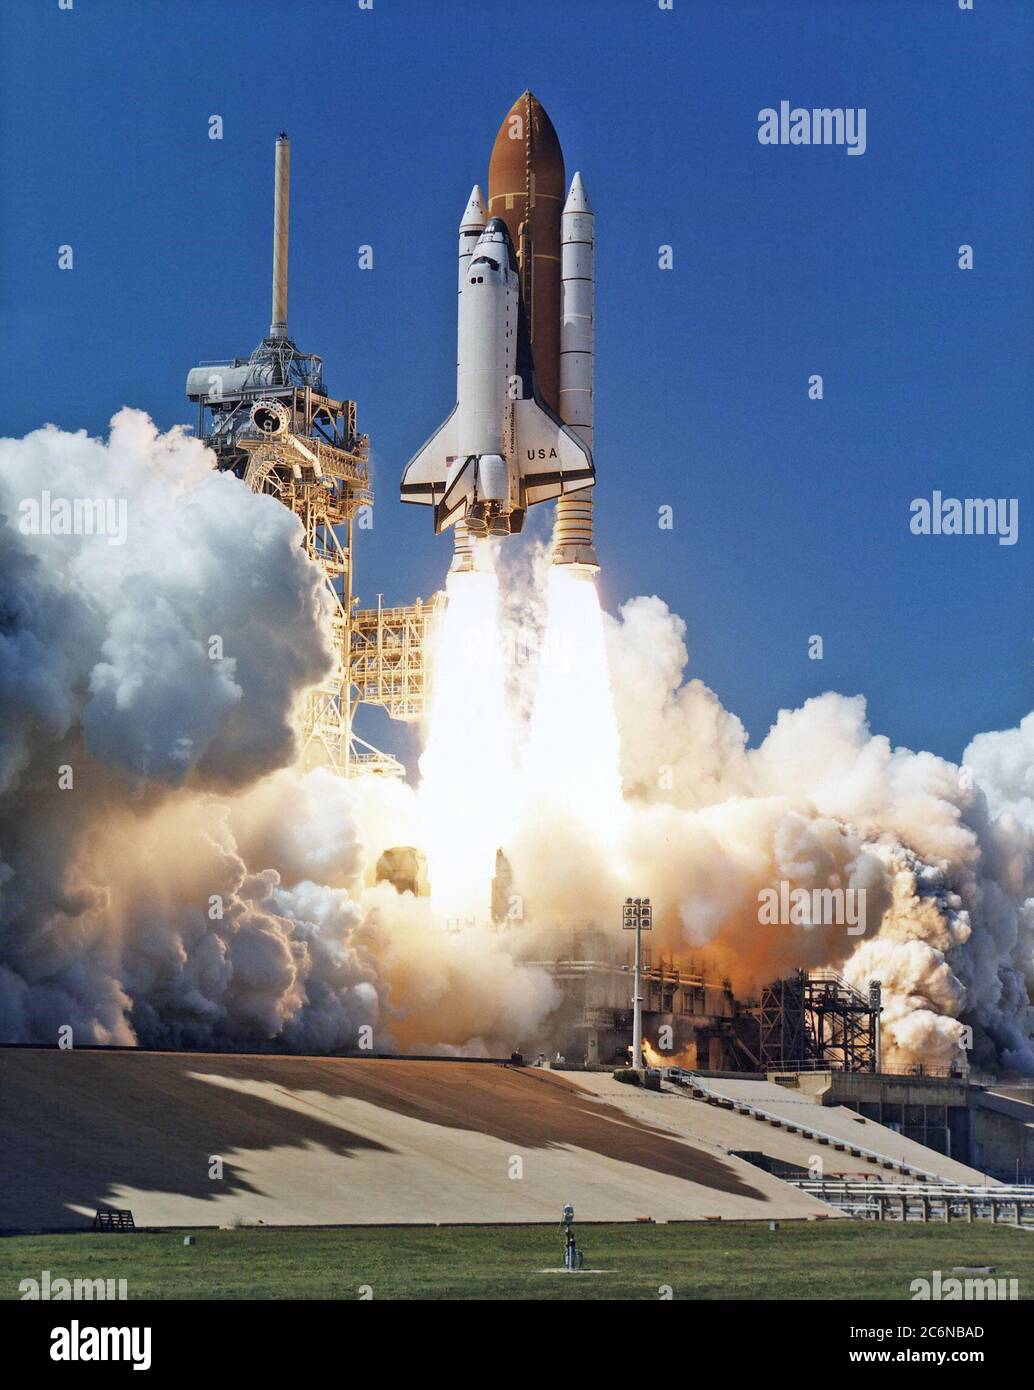 Like a rising sun lighting up the afternoon sky, the Space Shuttle Columbia soars from Launch Pad 39A at 2:20:32 p.m. EST, April 4, on the 16-day Microgravity Science Laboratory-1 (MSL-1) mission. The crew members are Mission Commander James D. Halsell, Jr.; Pilot Susan L. Still; Payload Commander Janice Voss; Mission Specialists Michael L. Gernhardt and Donald A. Thomas; and Payload Specialists Roger K. Crouch and Gregory T. Linteris. Stock Photo